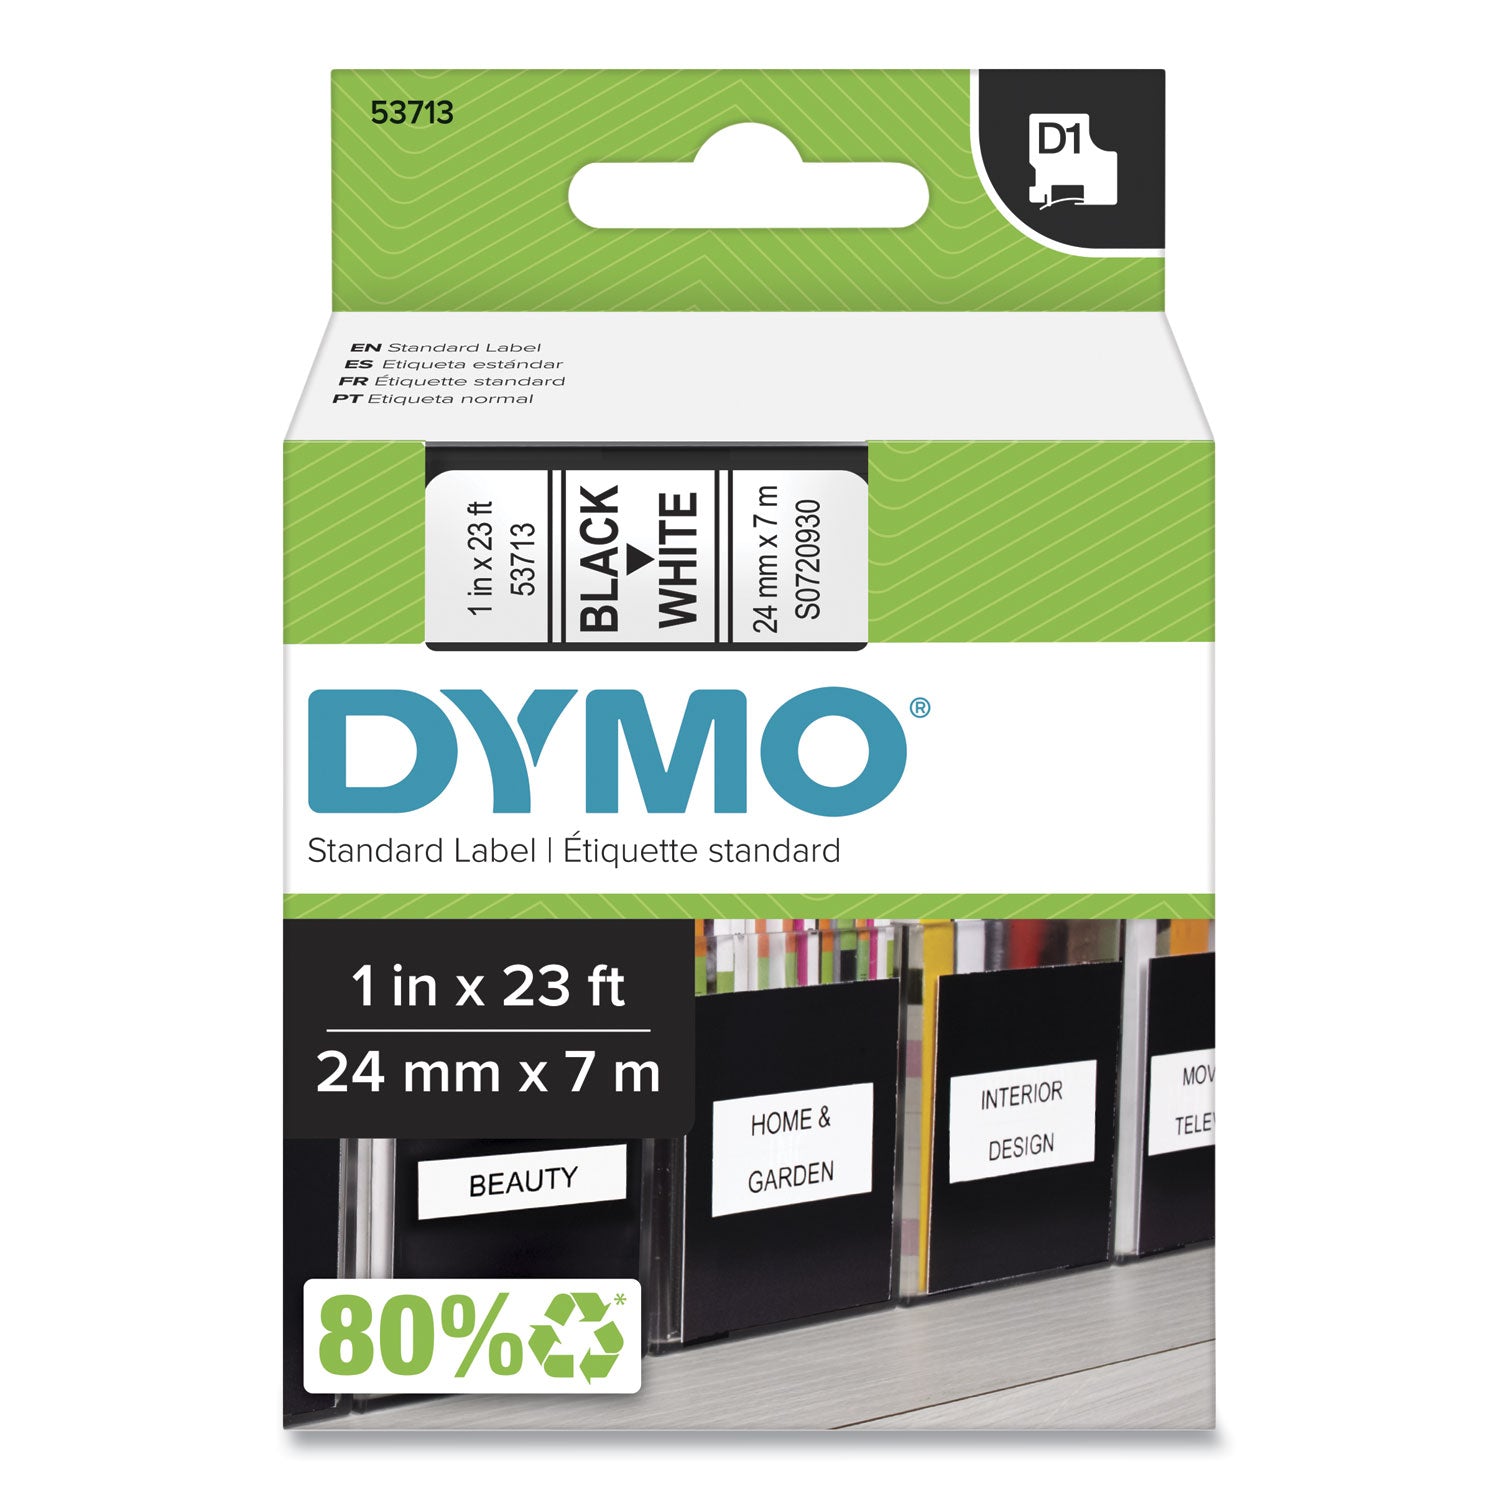 D1 High-Performance Polyester Removable Label Tape, 1" x 23 ft, Black on White - 